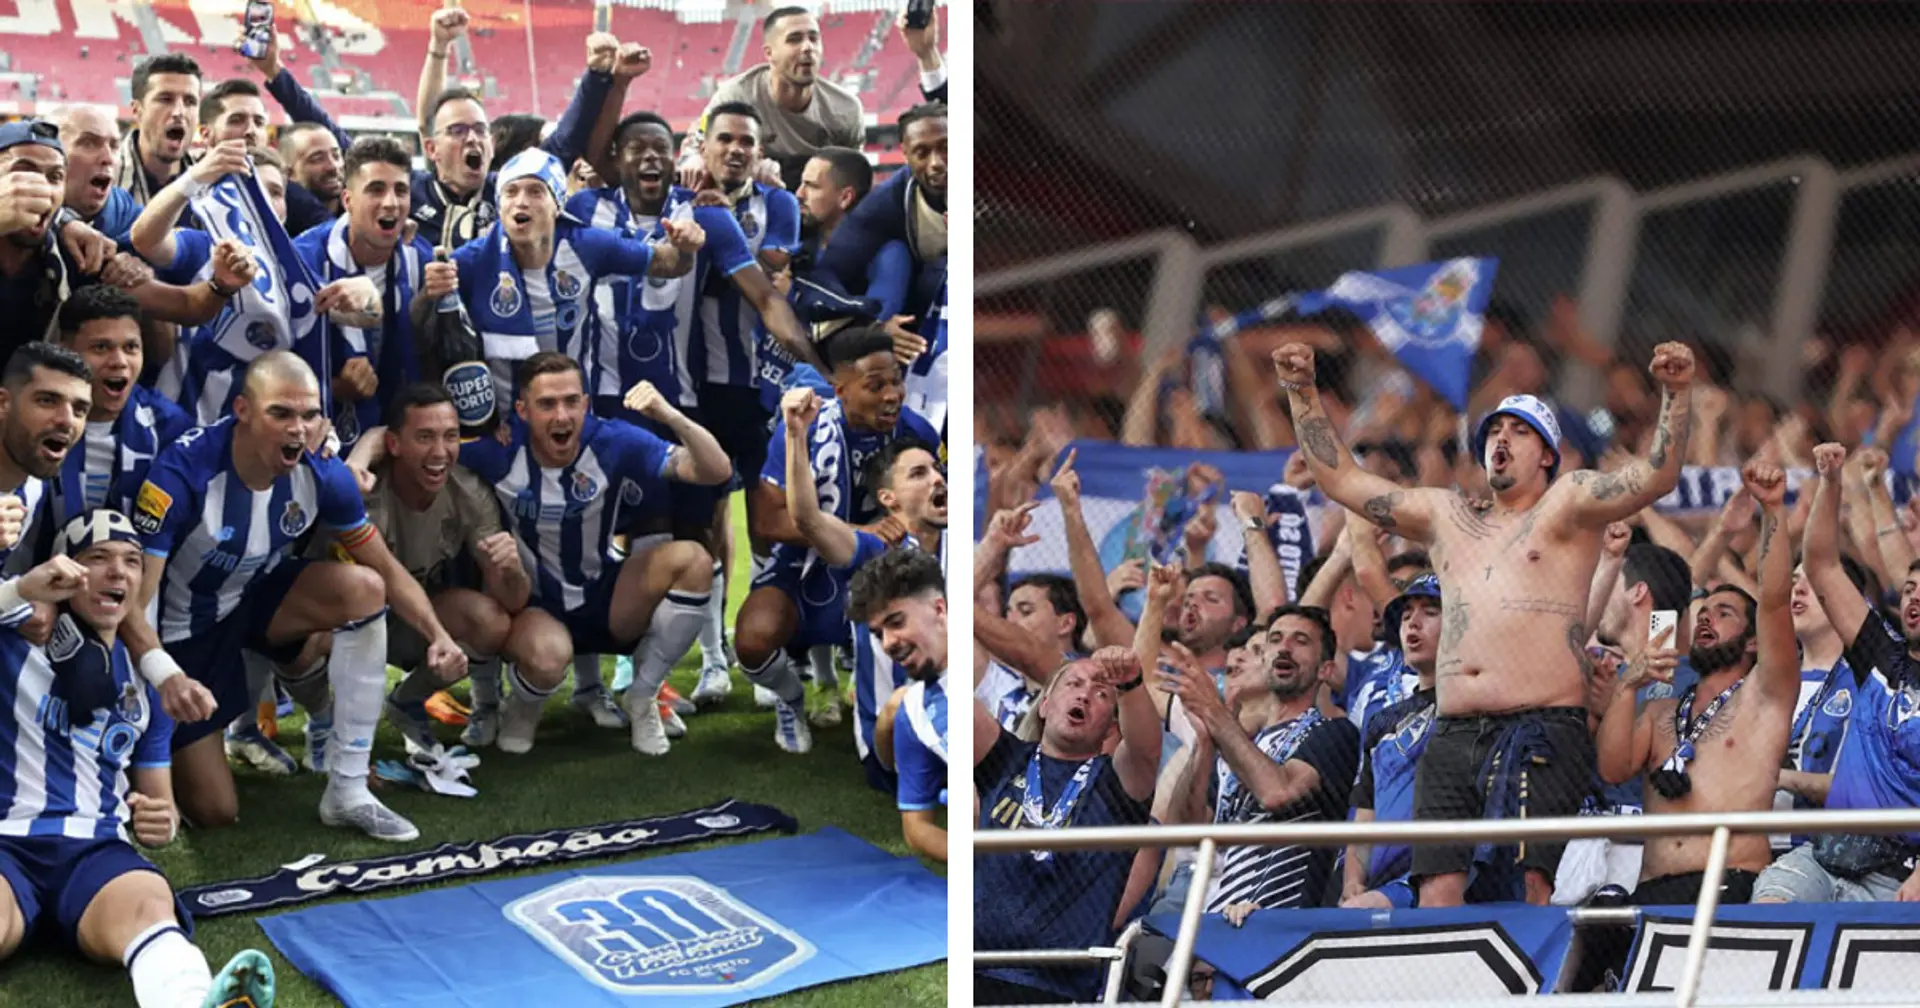 FC Porto fan reportedly stabbed to death by fellow supporters during title celebrations